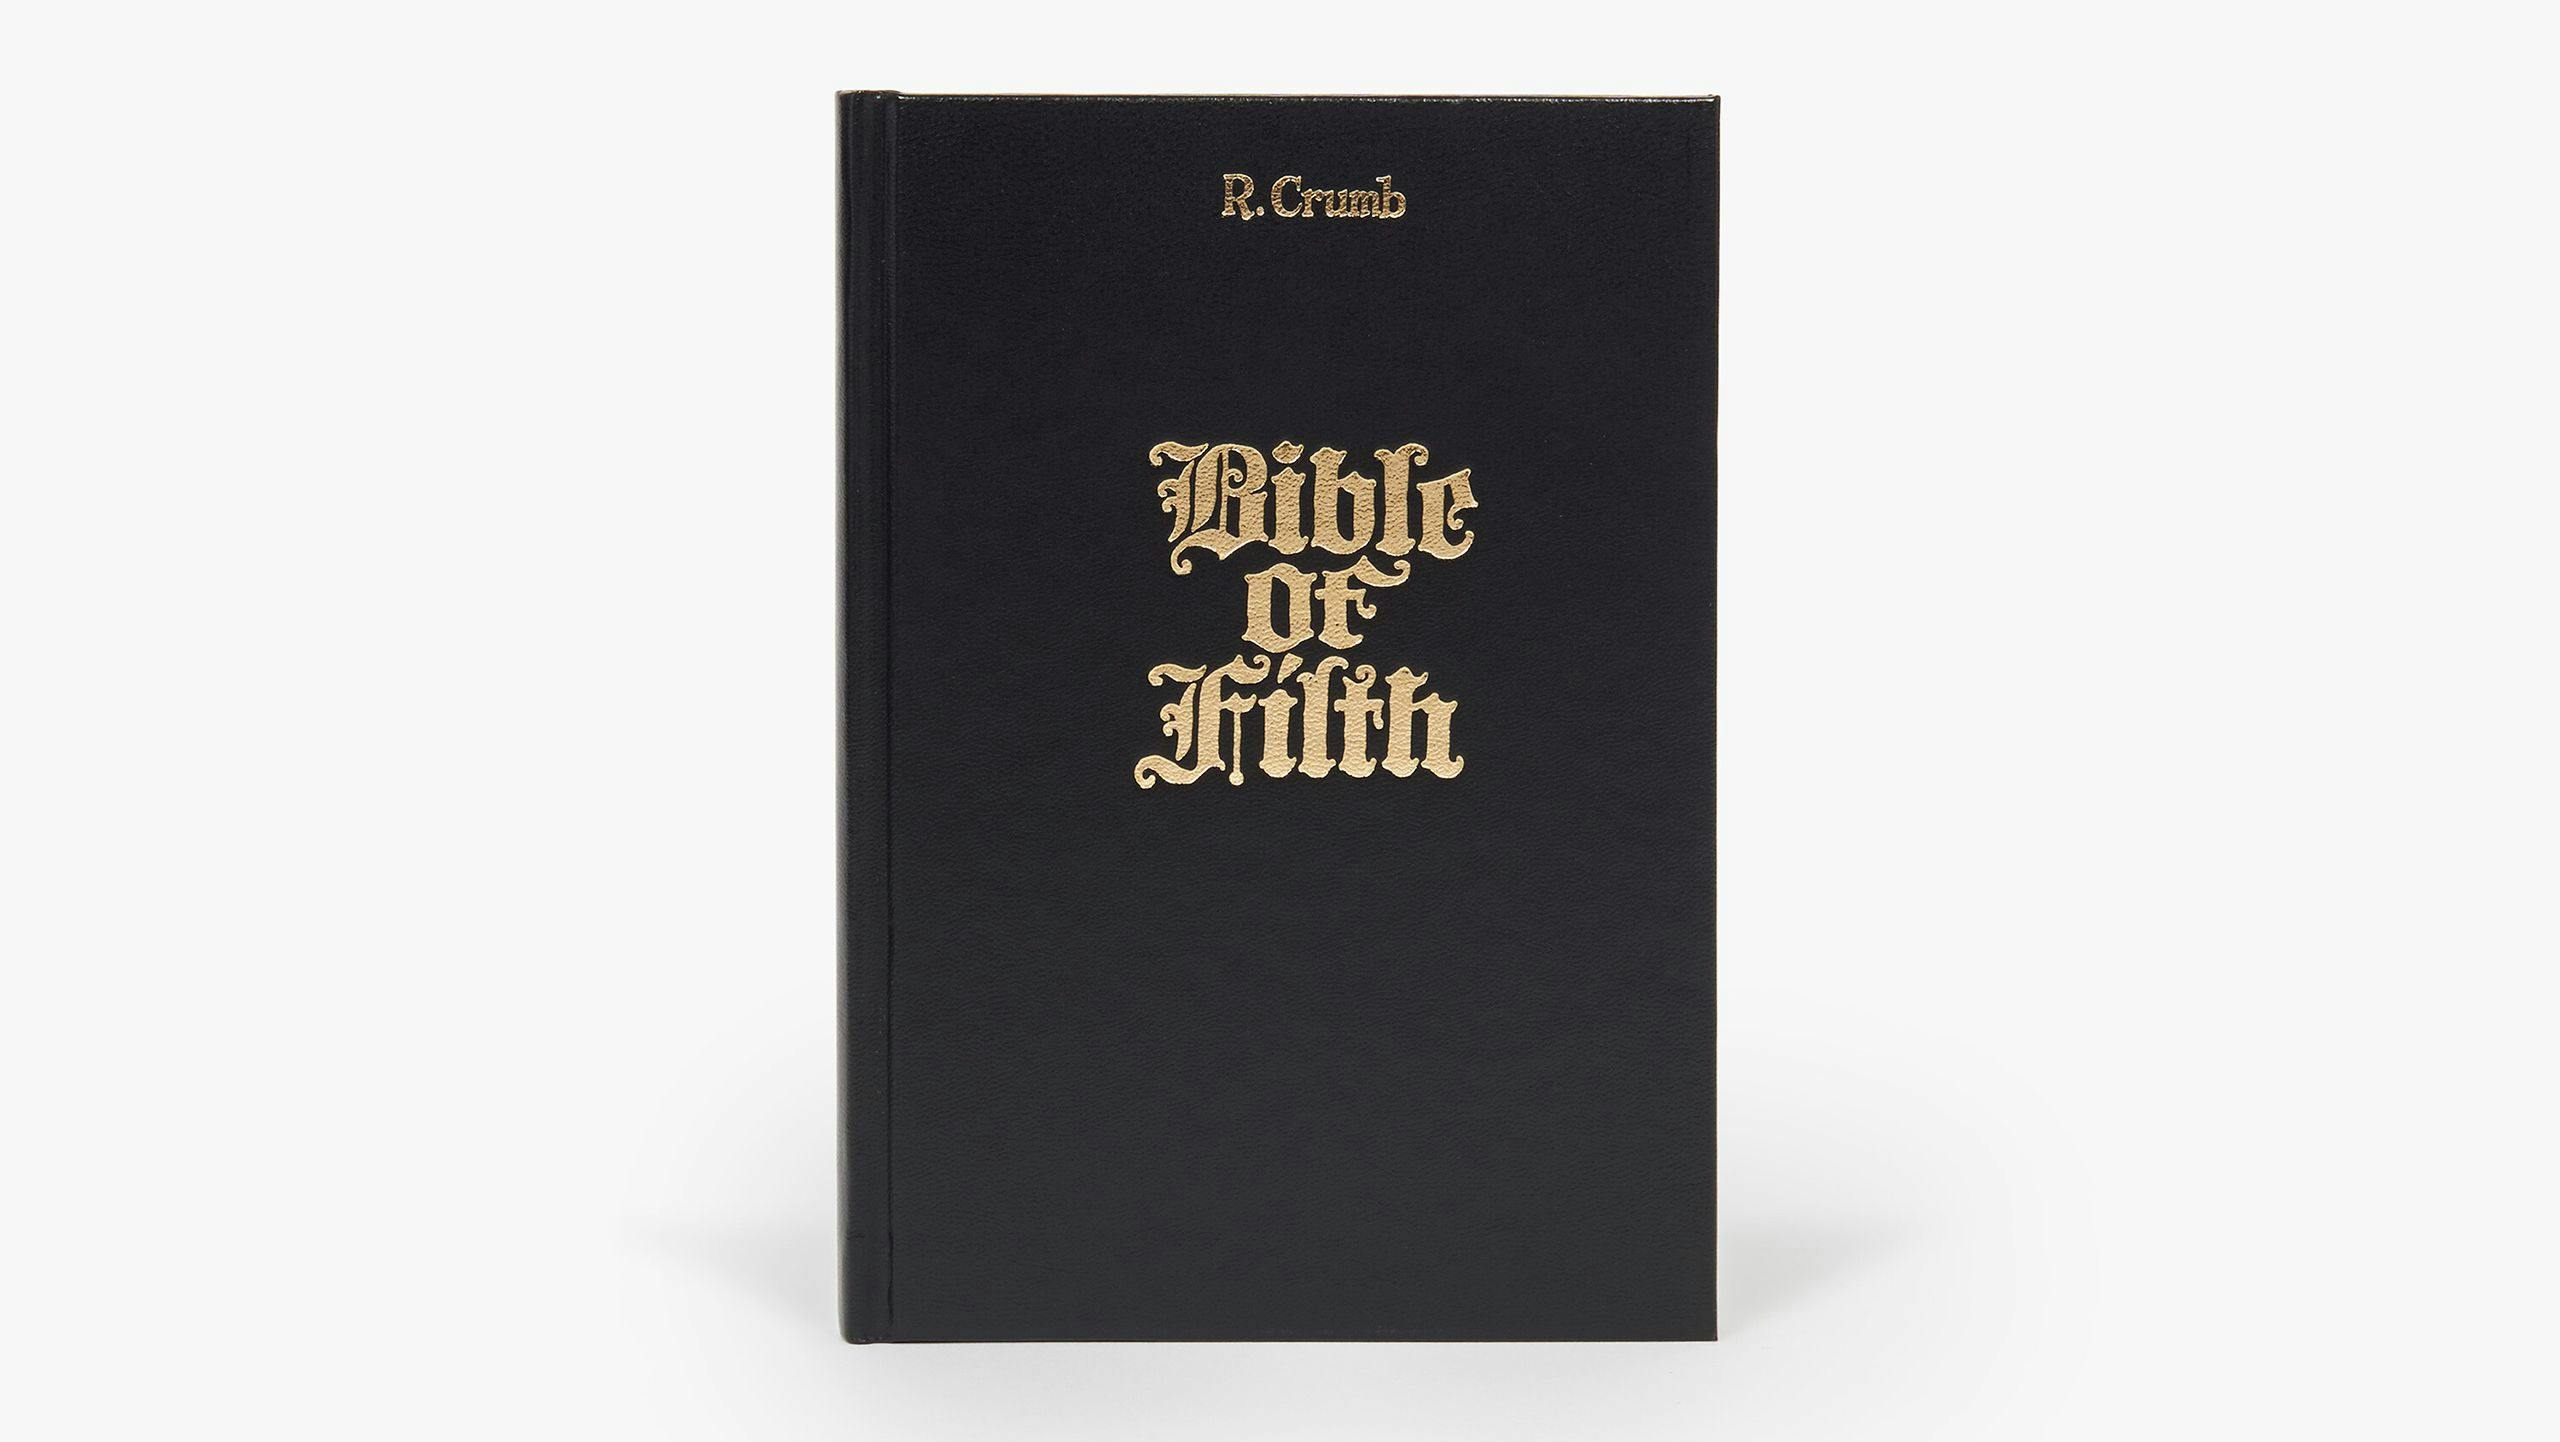 A book from David Zwirner Books by R. Crumb titled Bible of Filth  dated 2017